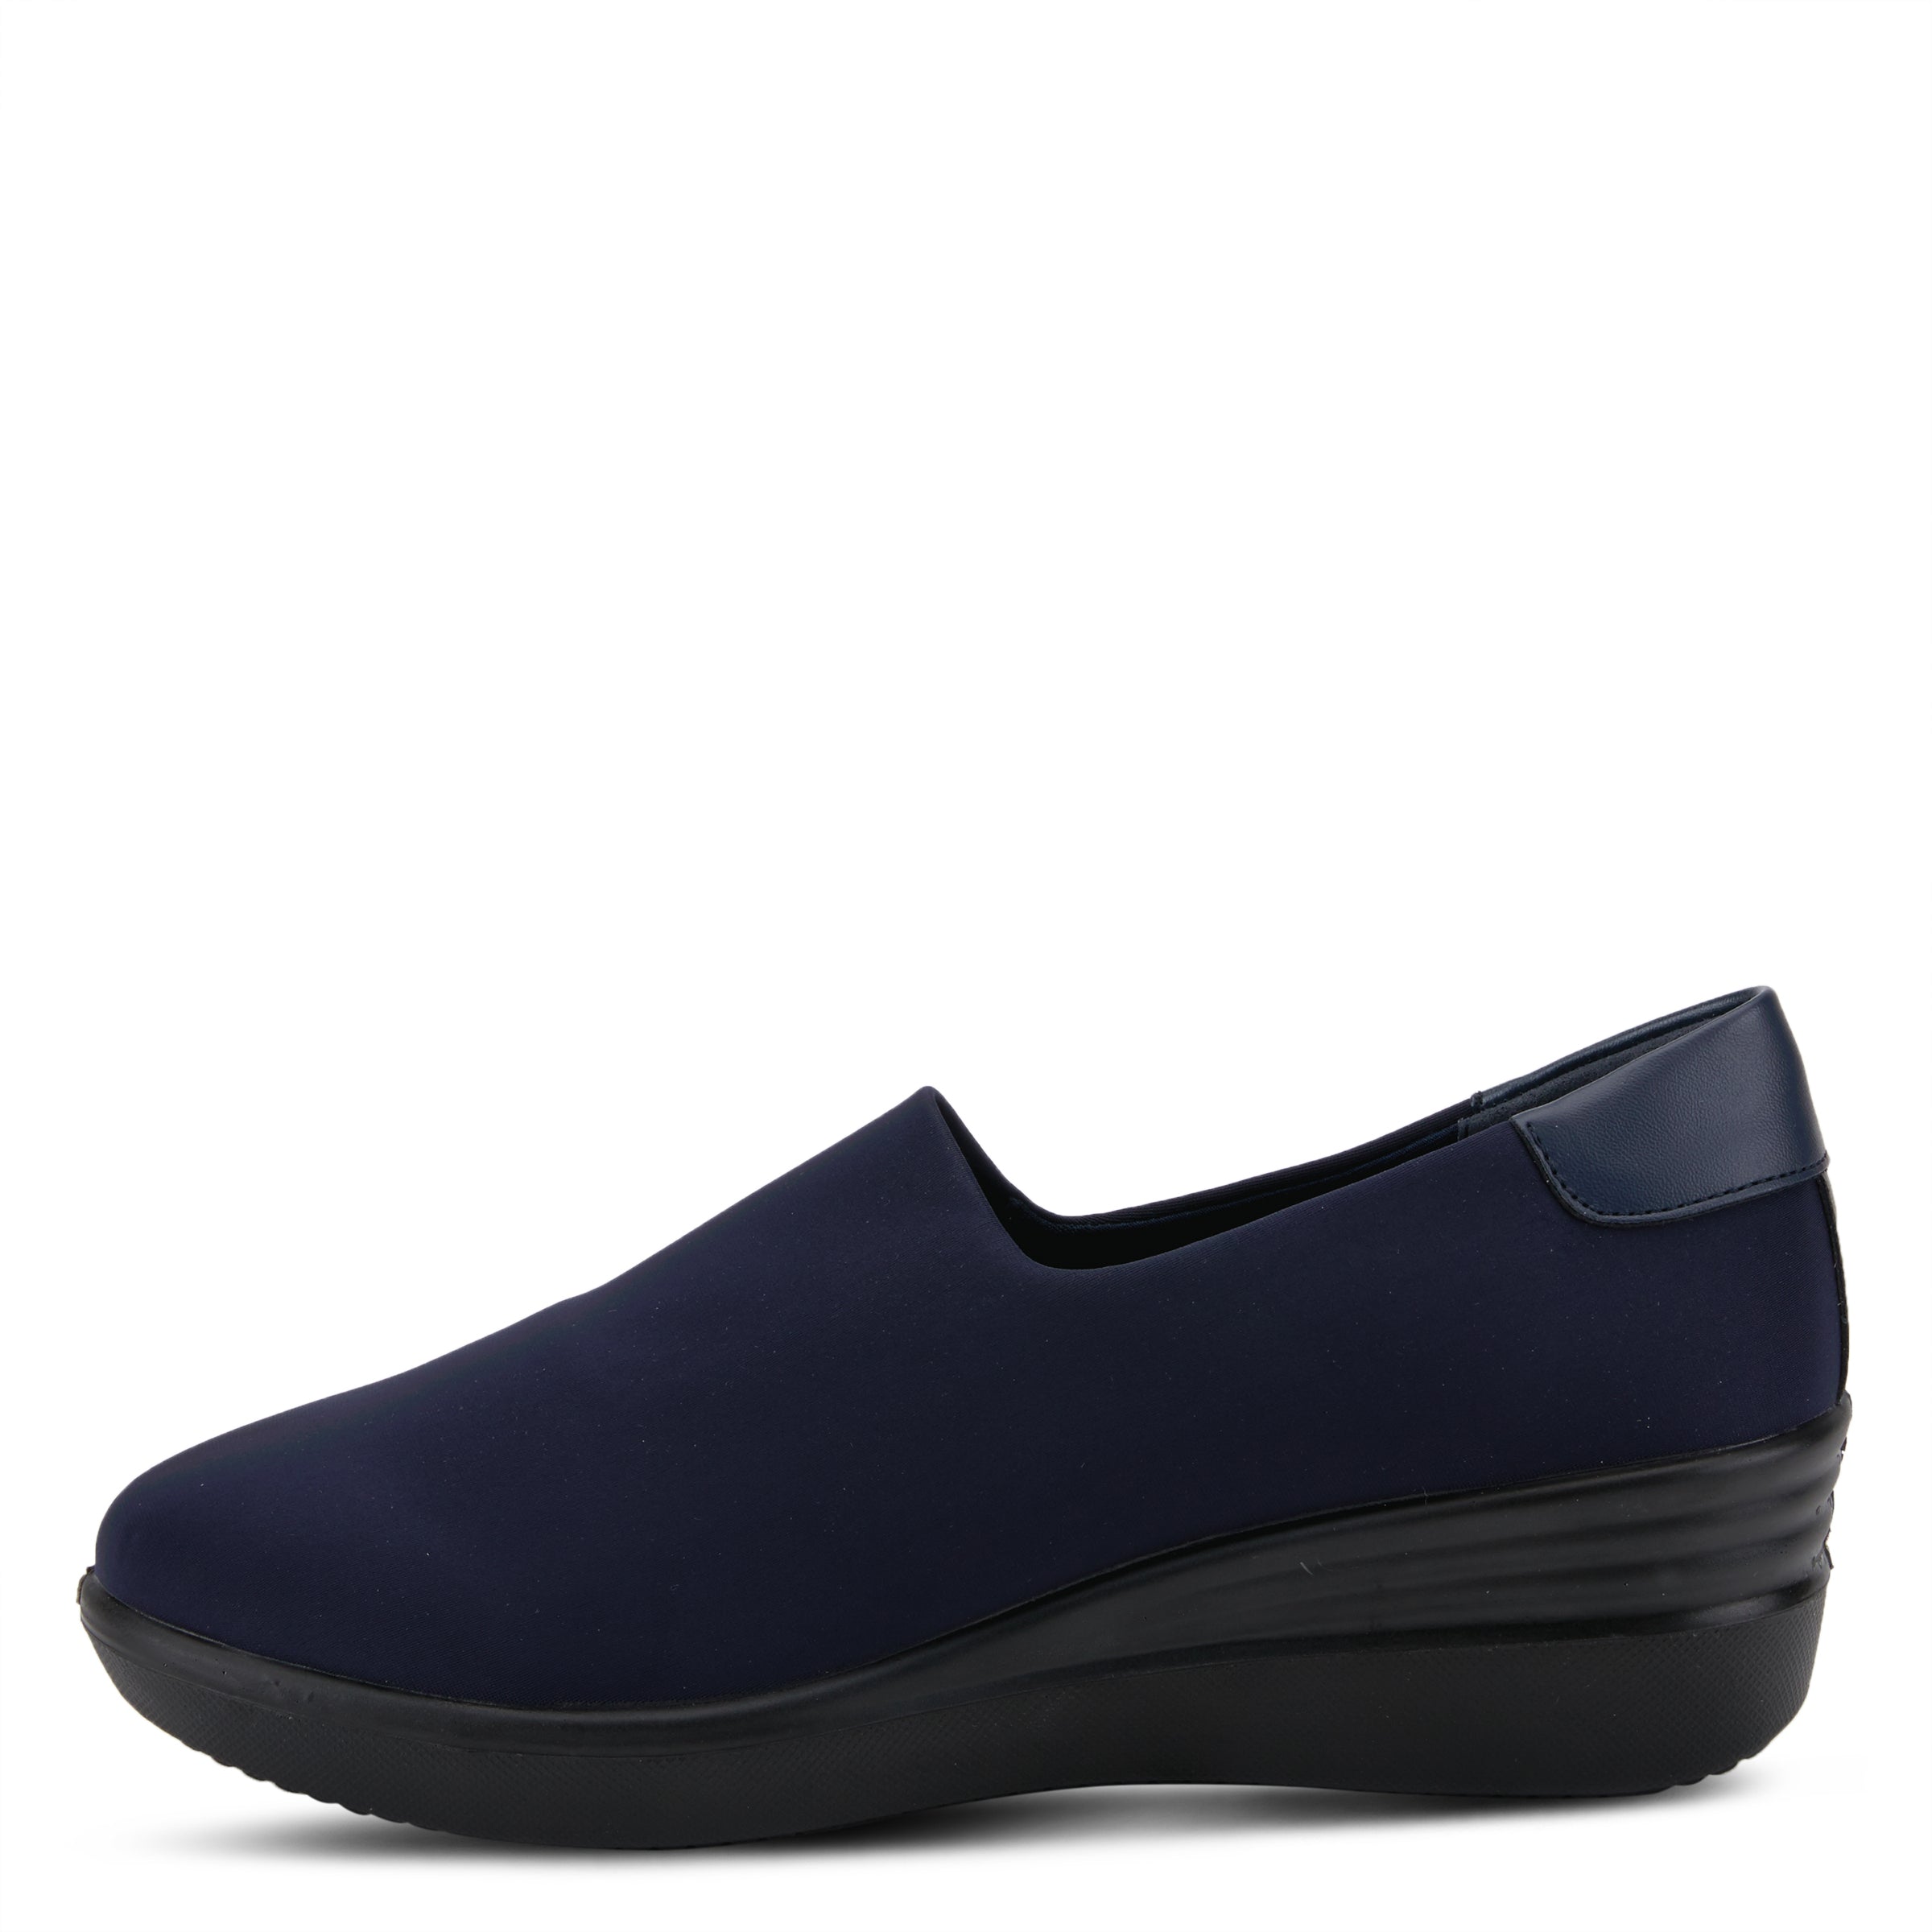 BLACK NORAL SLIP-ON SHOE by FLEXUS – Spring Step Shoes